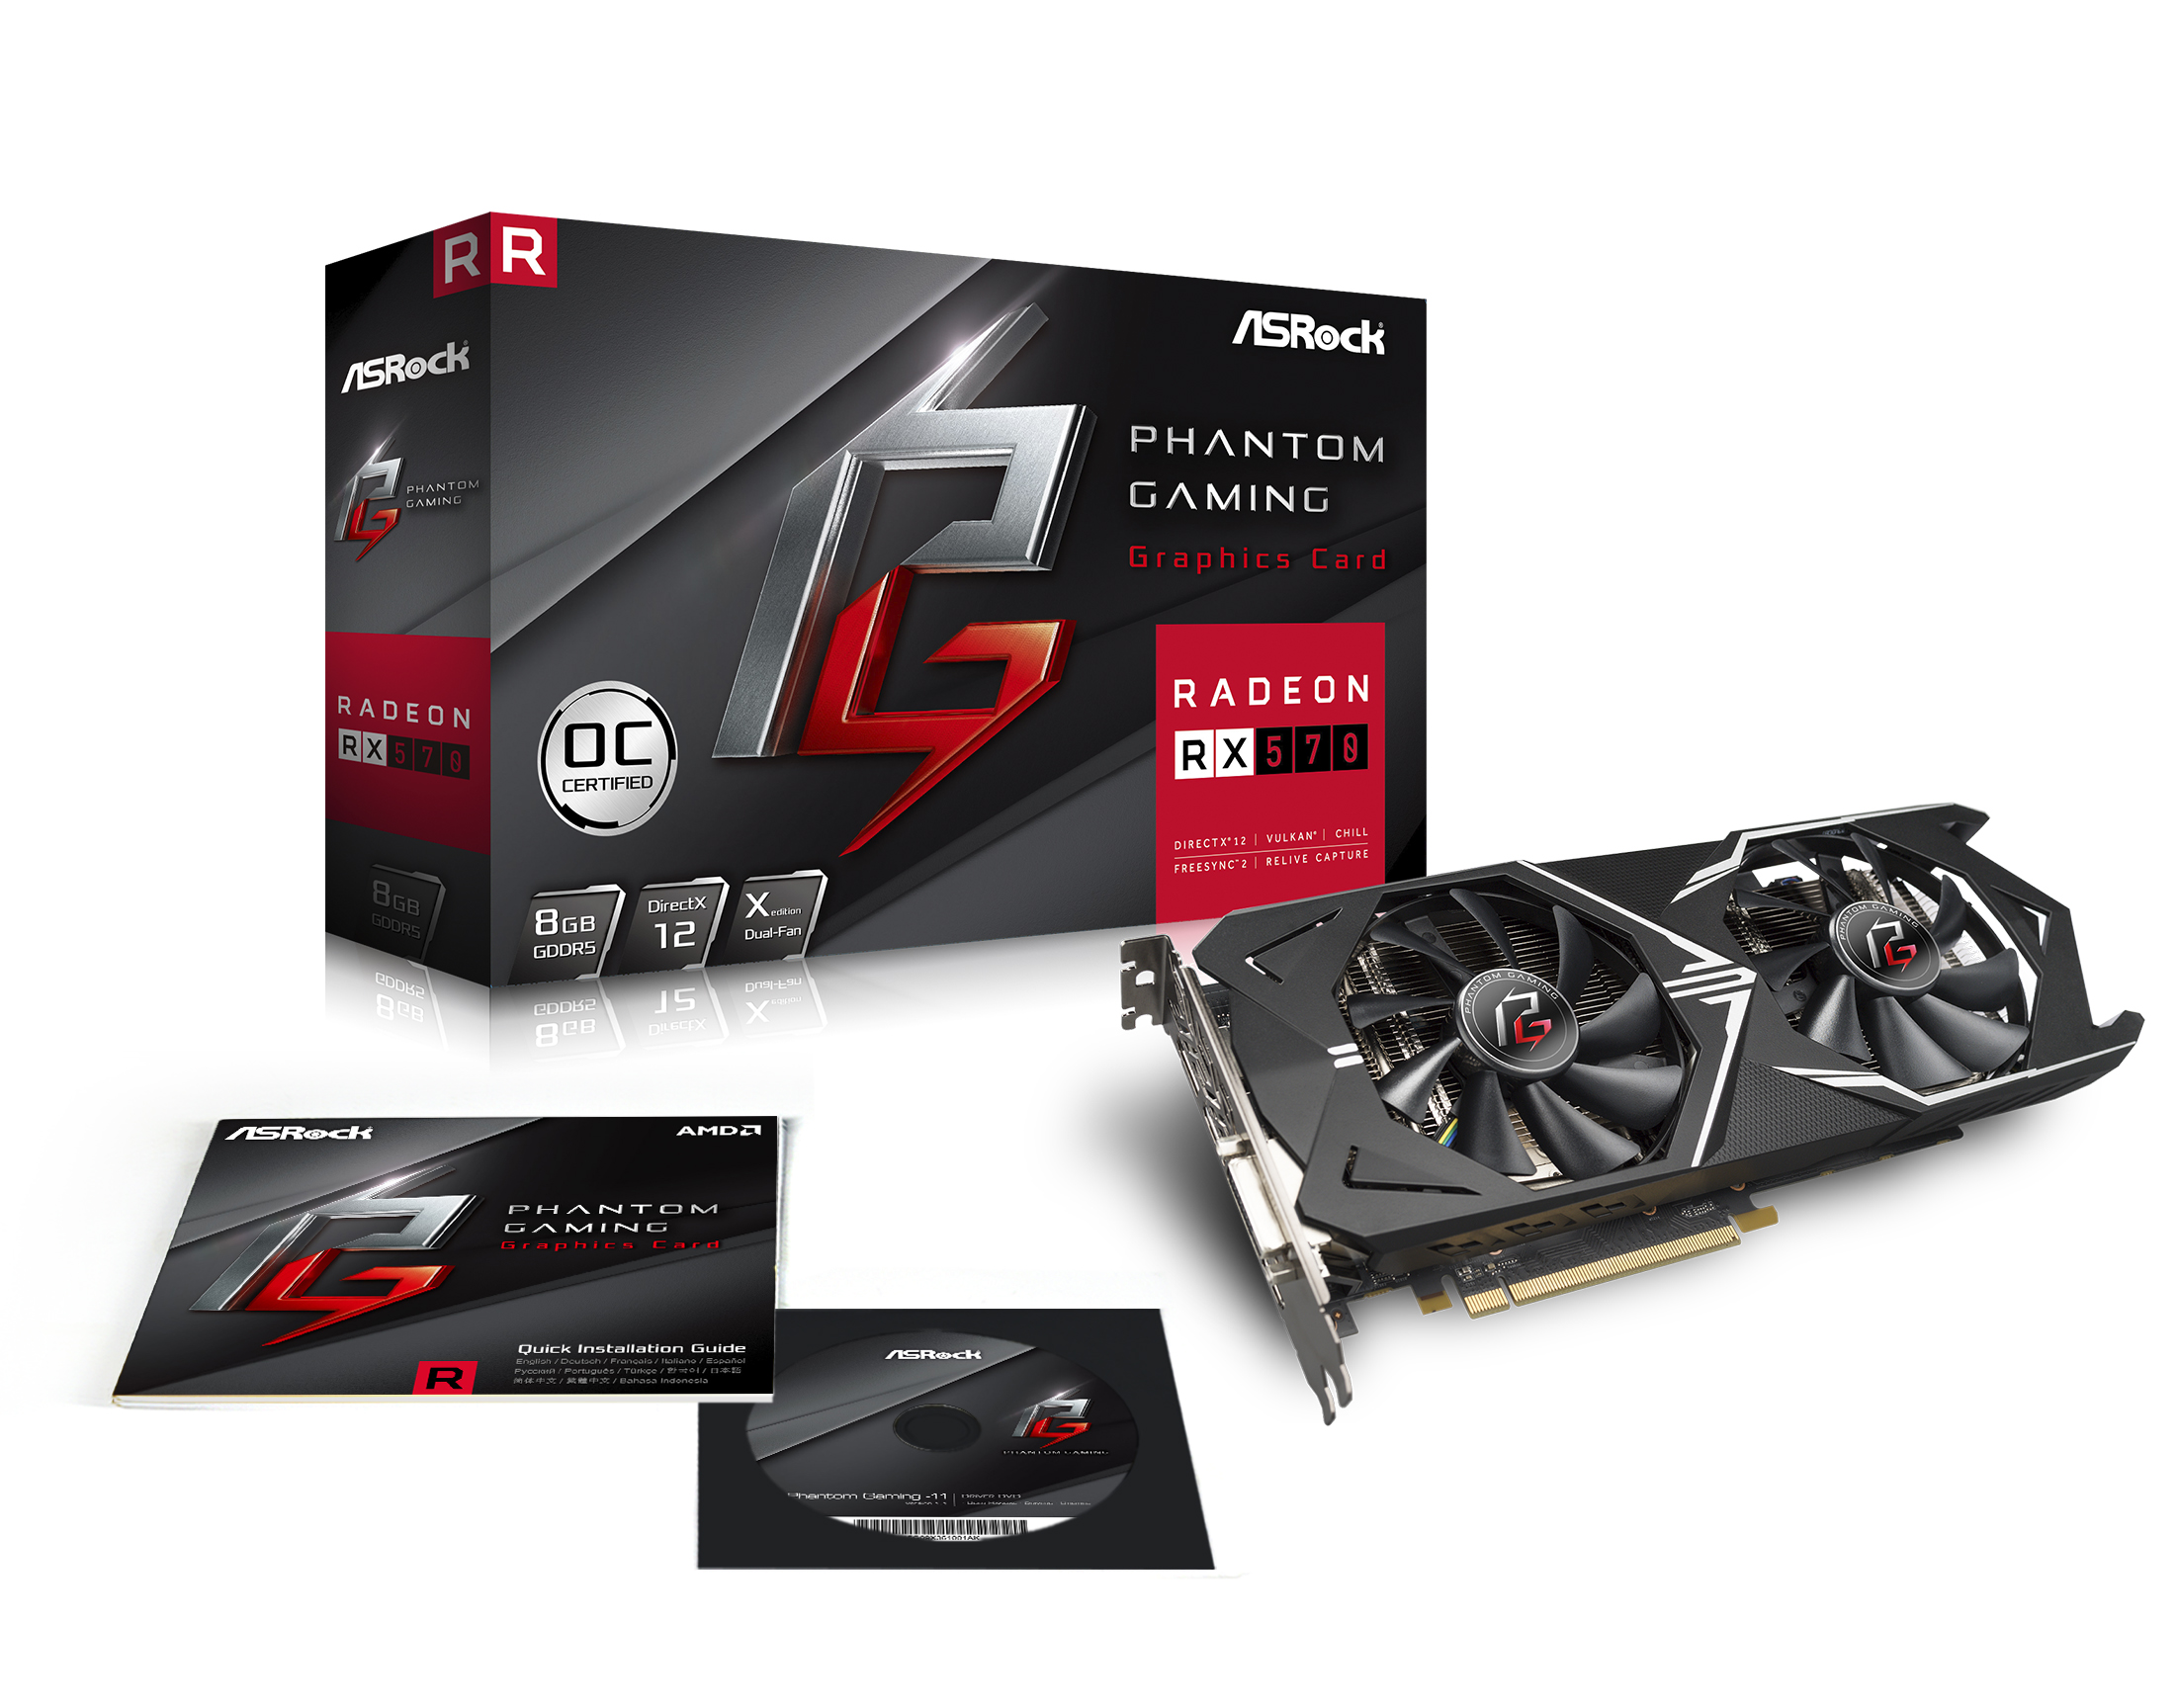 Official And Exclusive Asrock S New Graphics Card Portfolio For Europe And Germany Igor Slab